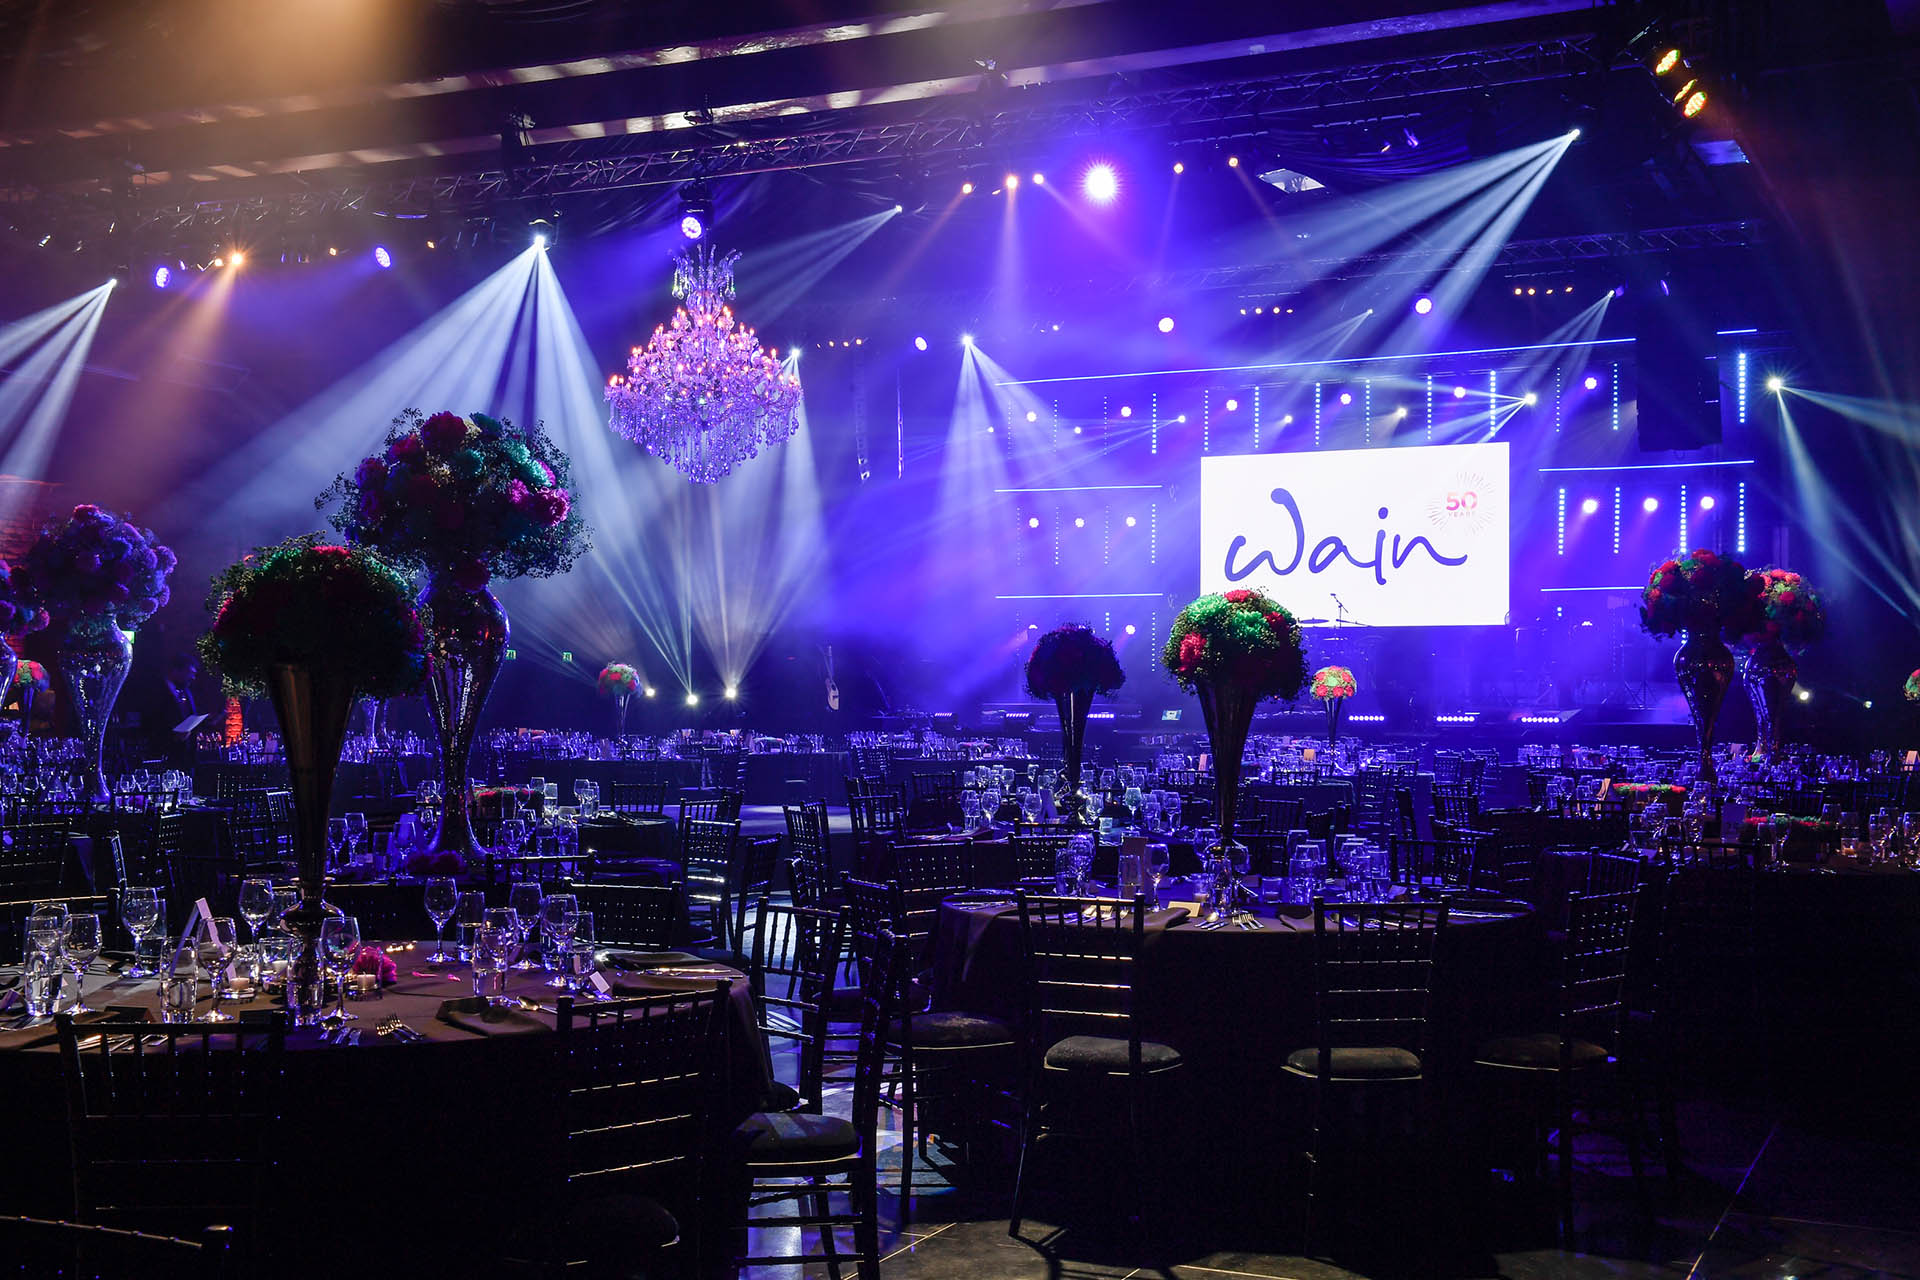 A corporate event that celebrated business achievements